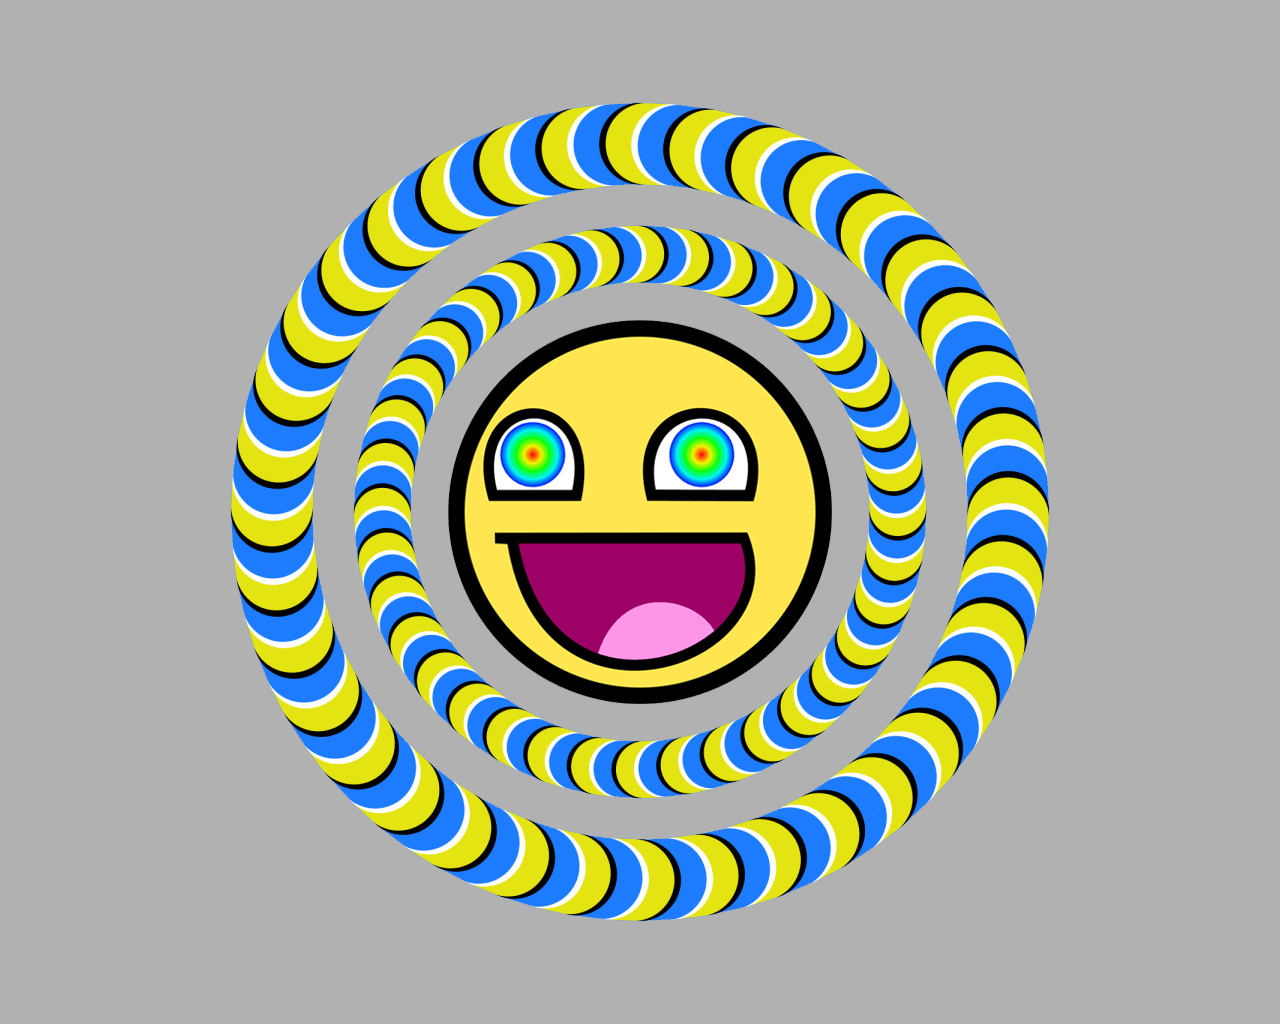 Smiley Picture - Image Abyss